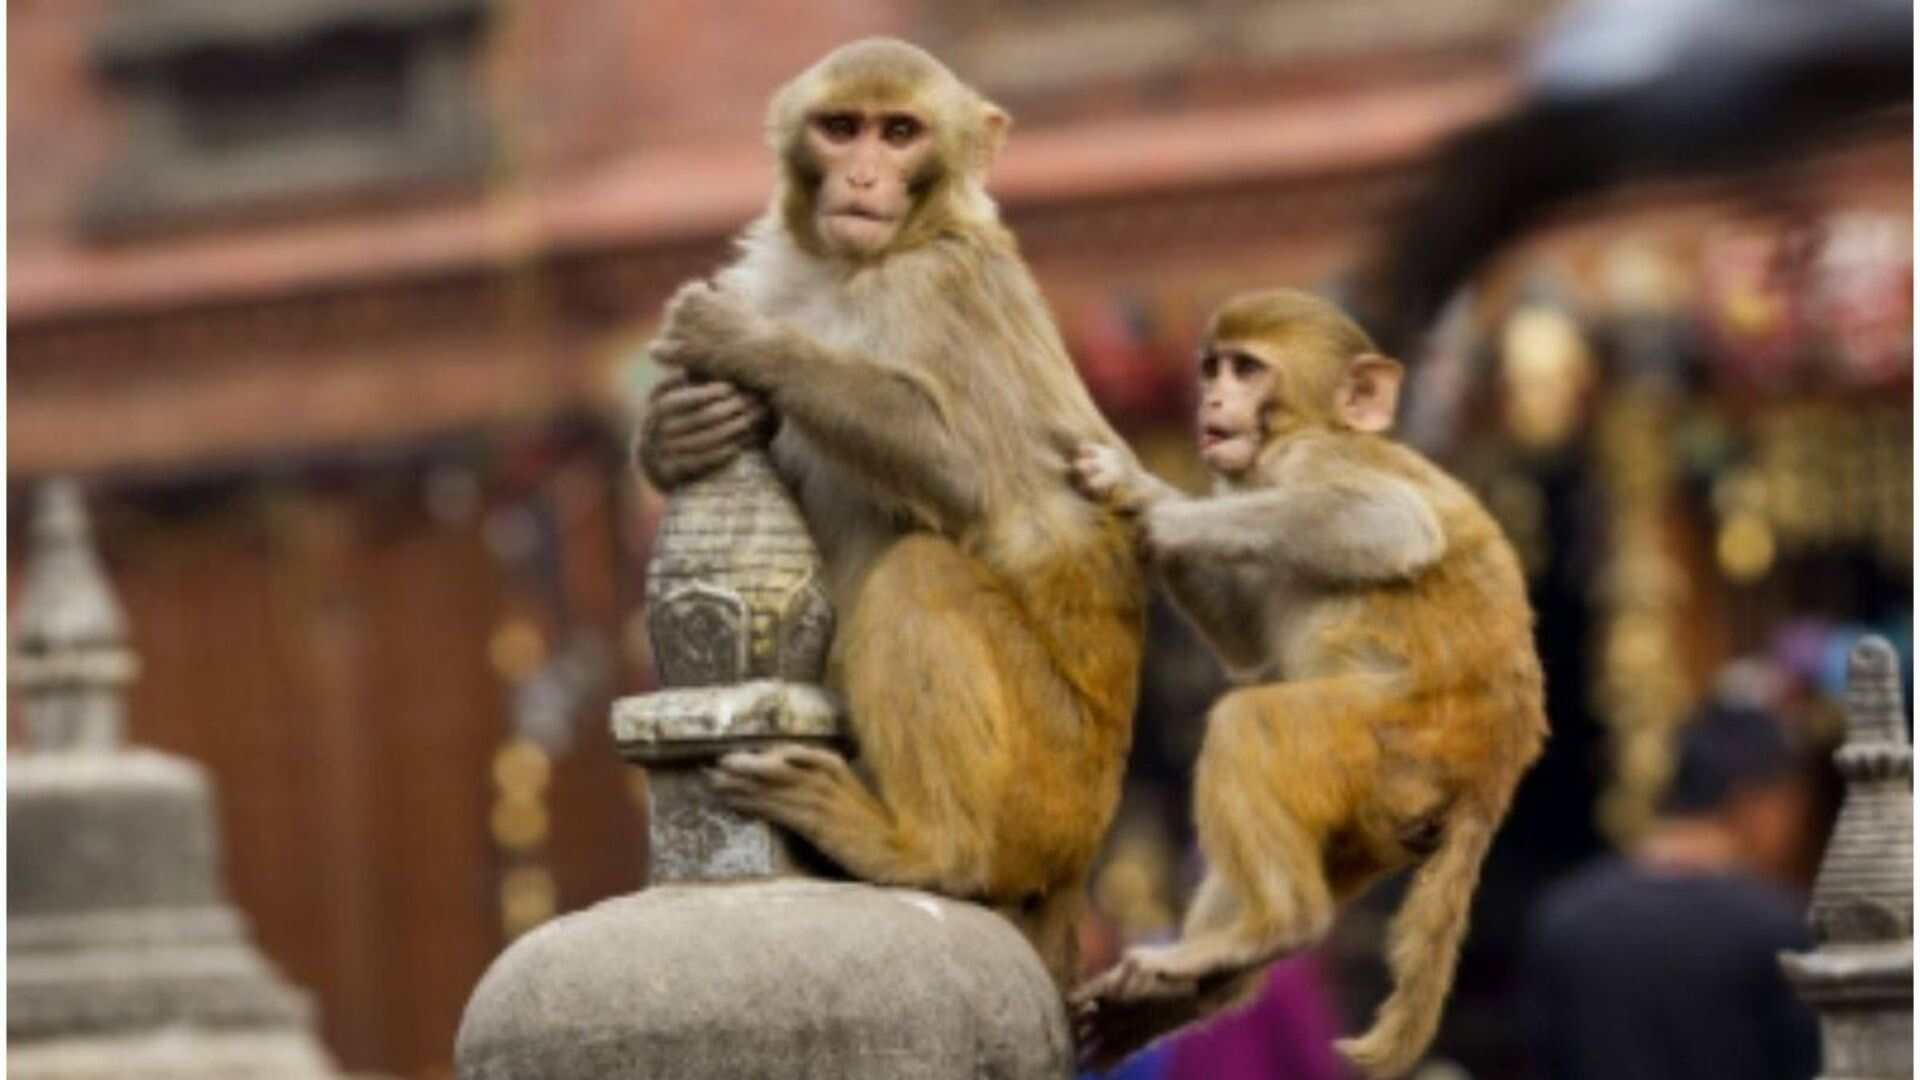 Himachal Pradesh: Monkey Picks Up 4-Month-Old Baby, Drops Child Shortly After